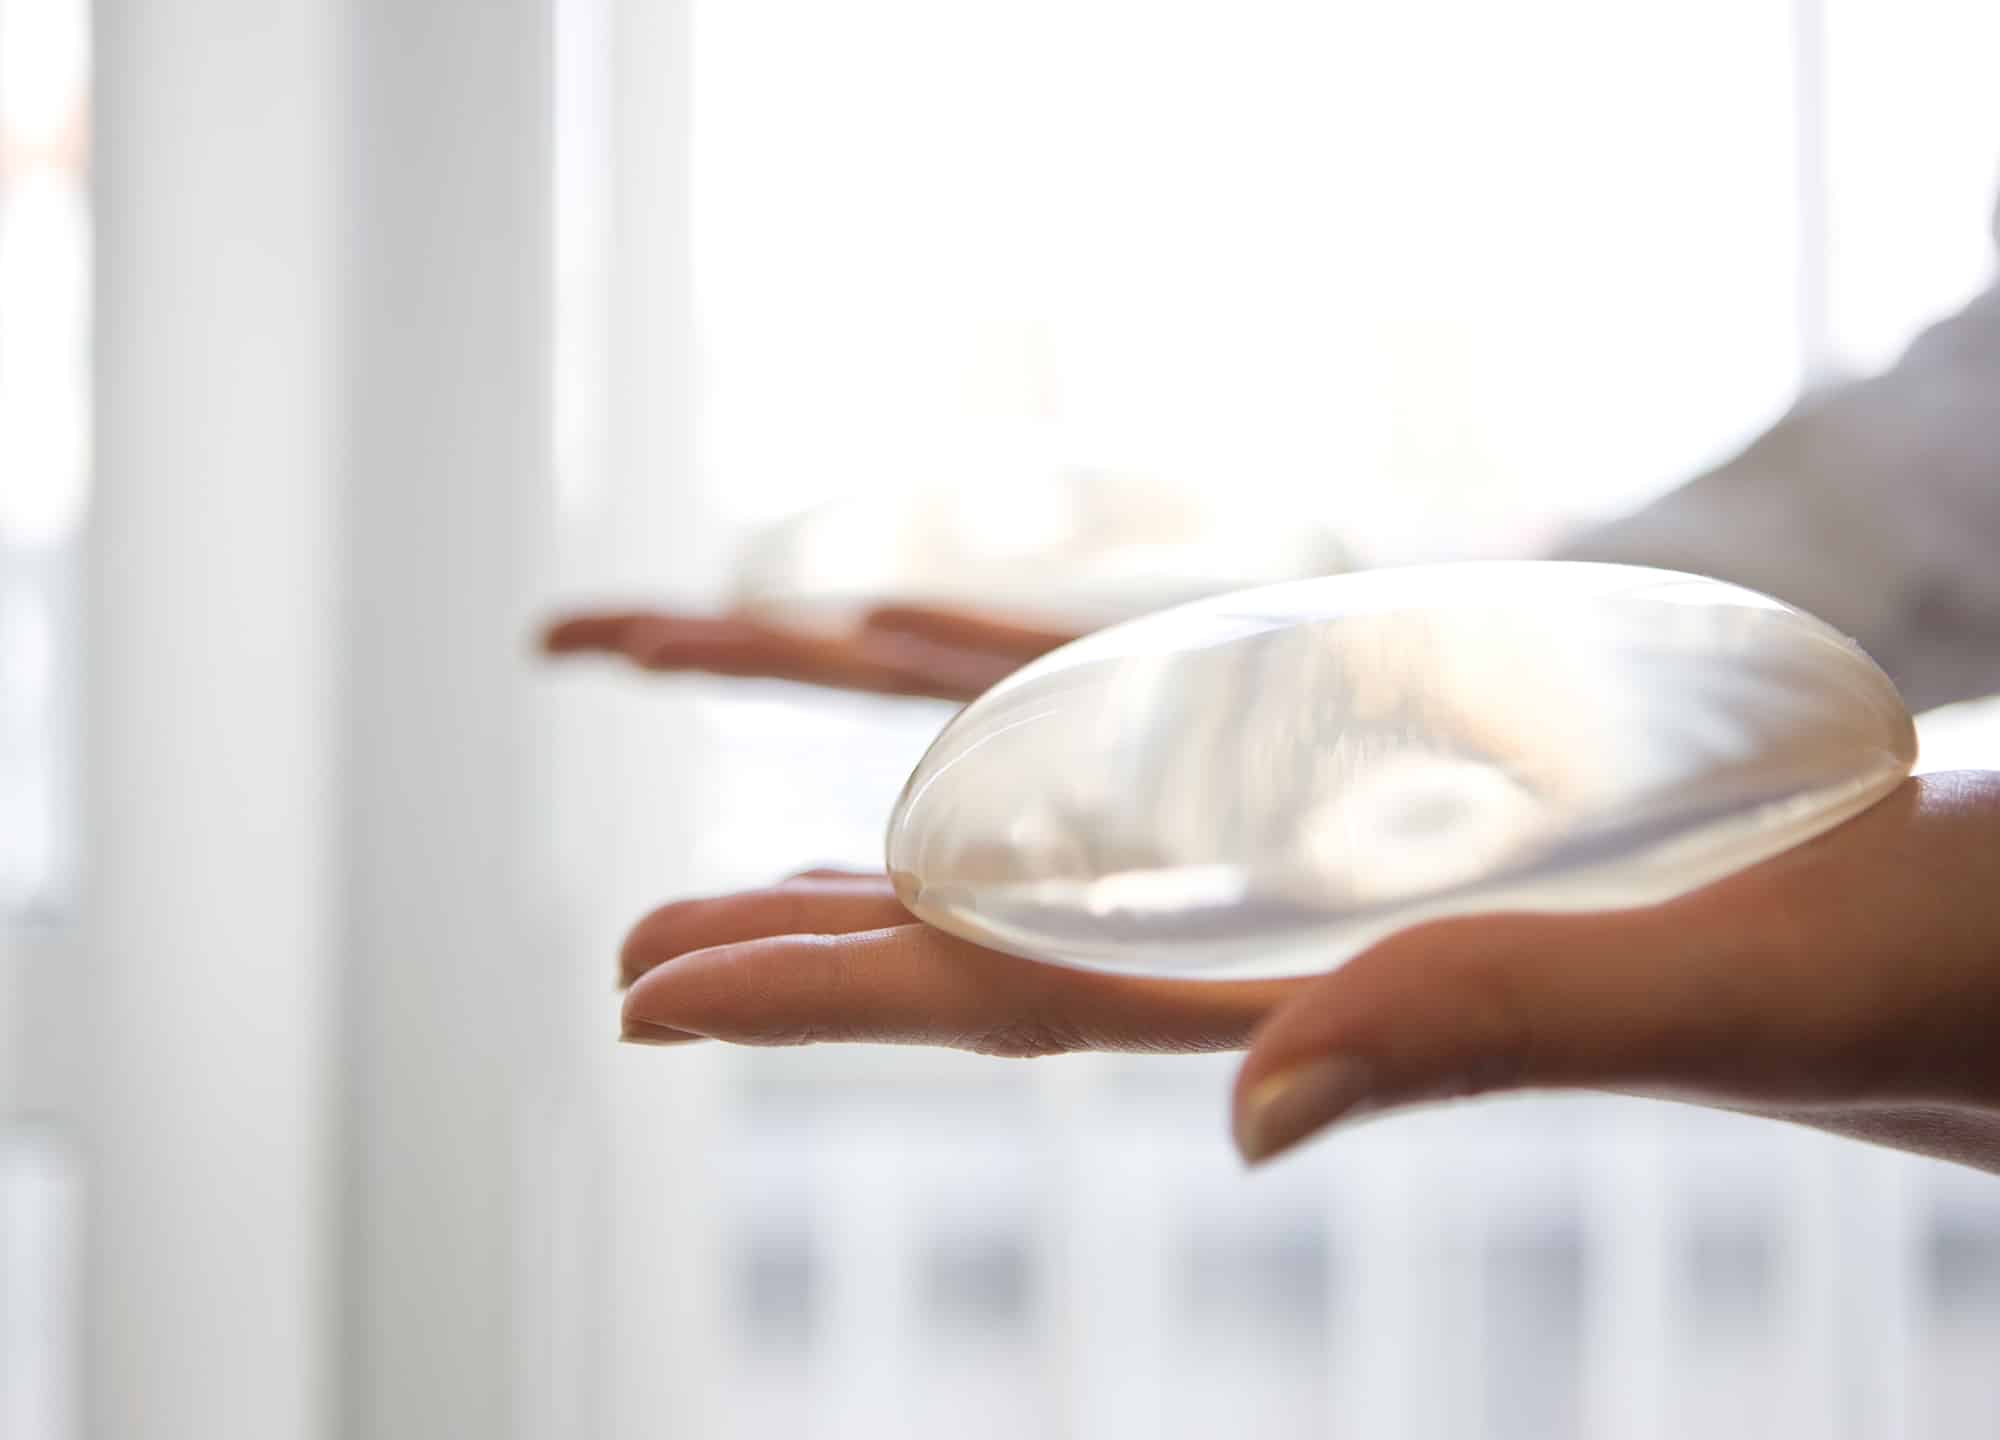 It's a popular procedure, but there are a lot of people feeling breast implant regret. Whether it's capsular contracture or boobie blues, you're not alone.